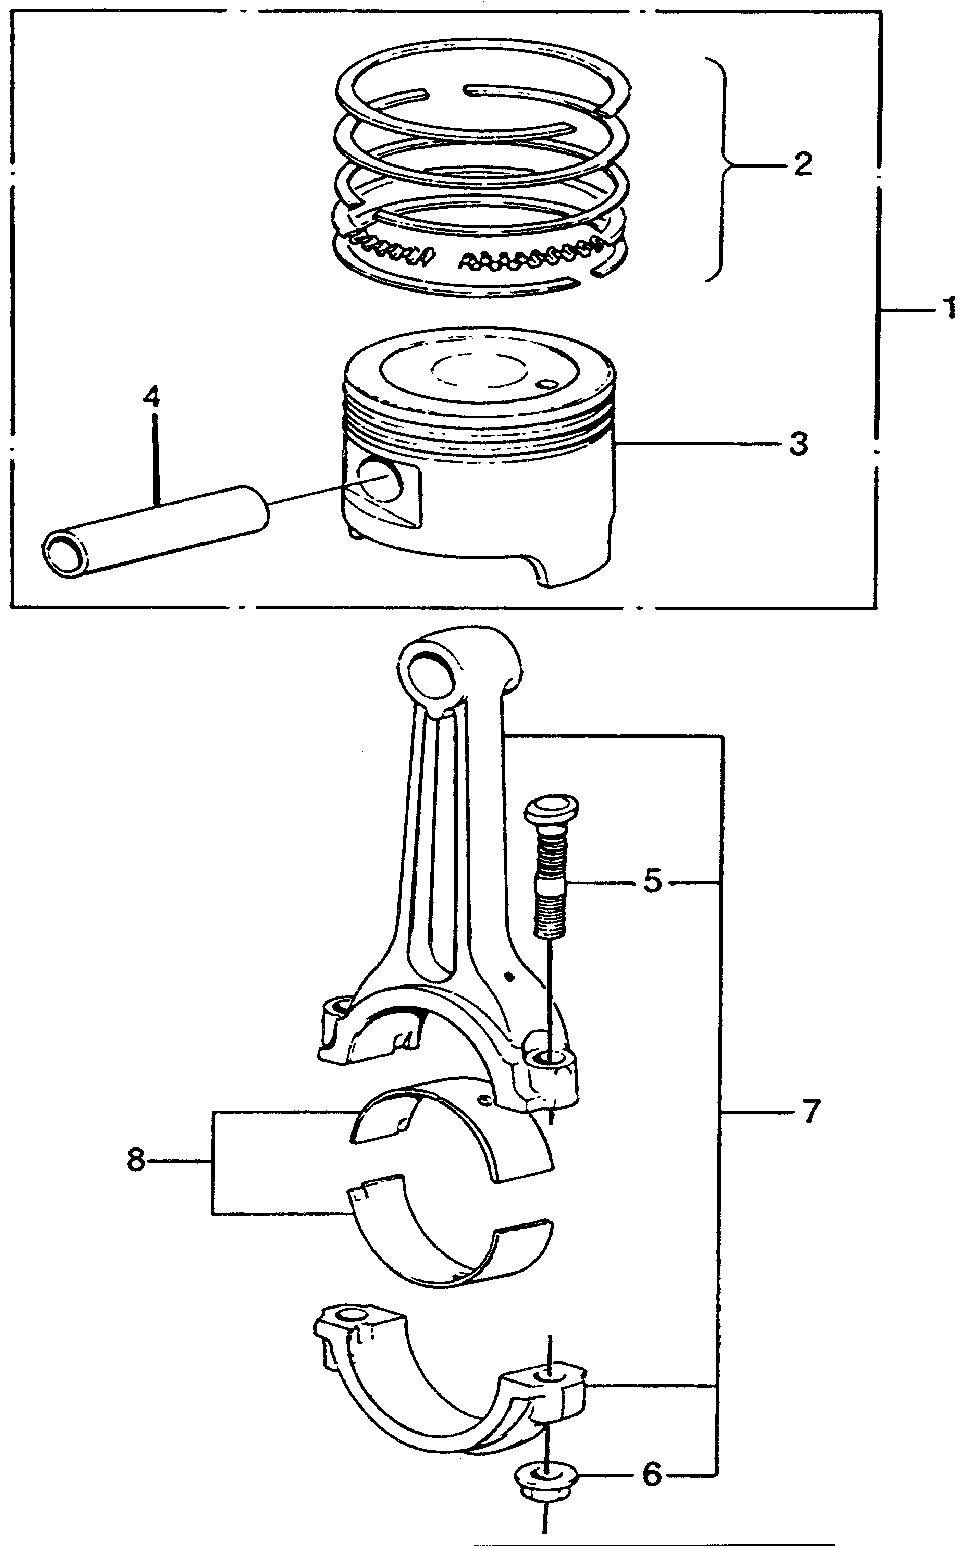 13205-634-010 - NUT, CONNECTING ROD